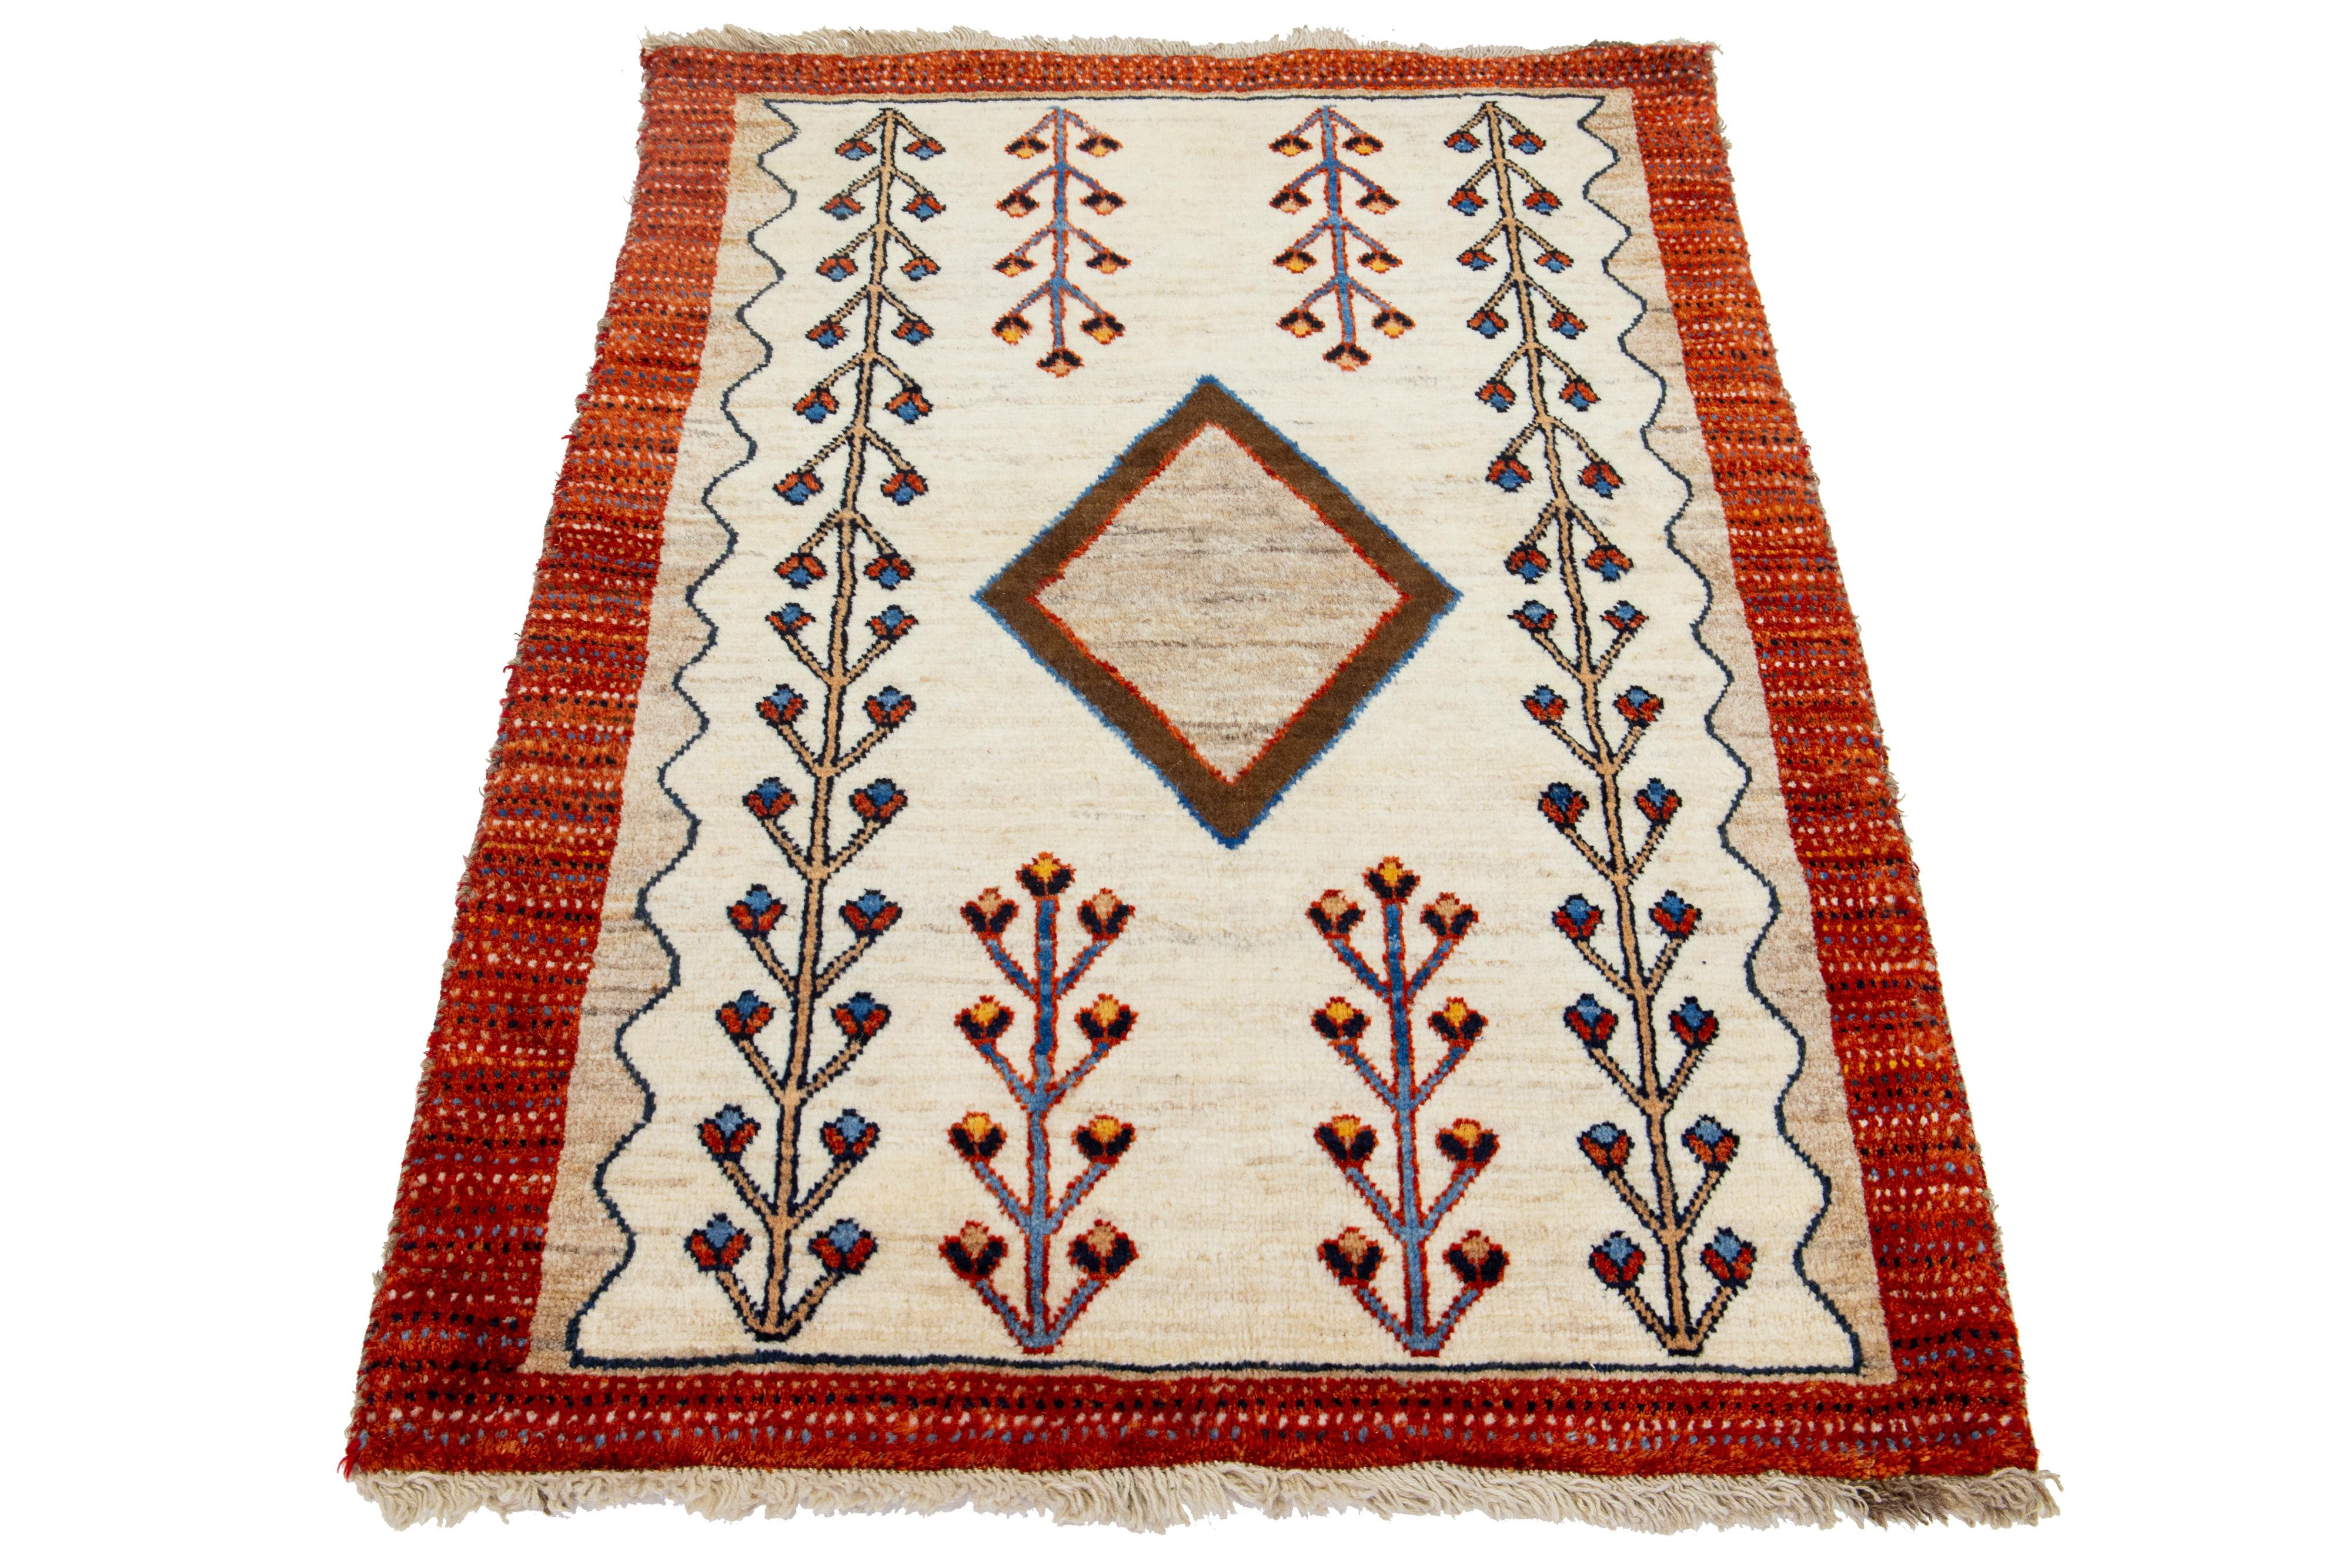 This modern Gabbeh rug is hand knotted with a contemporary geometric pattern. The beige base is accented with rust, brown, and blue details.

This rug measures 3'3